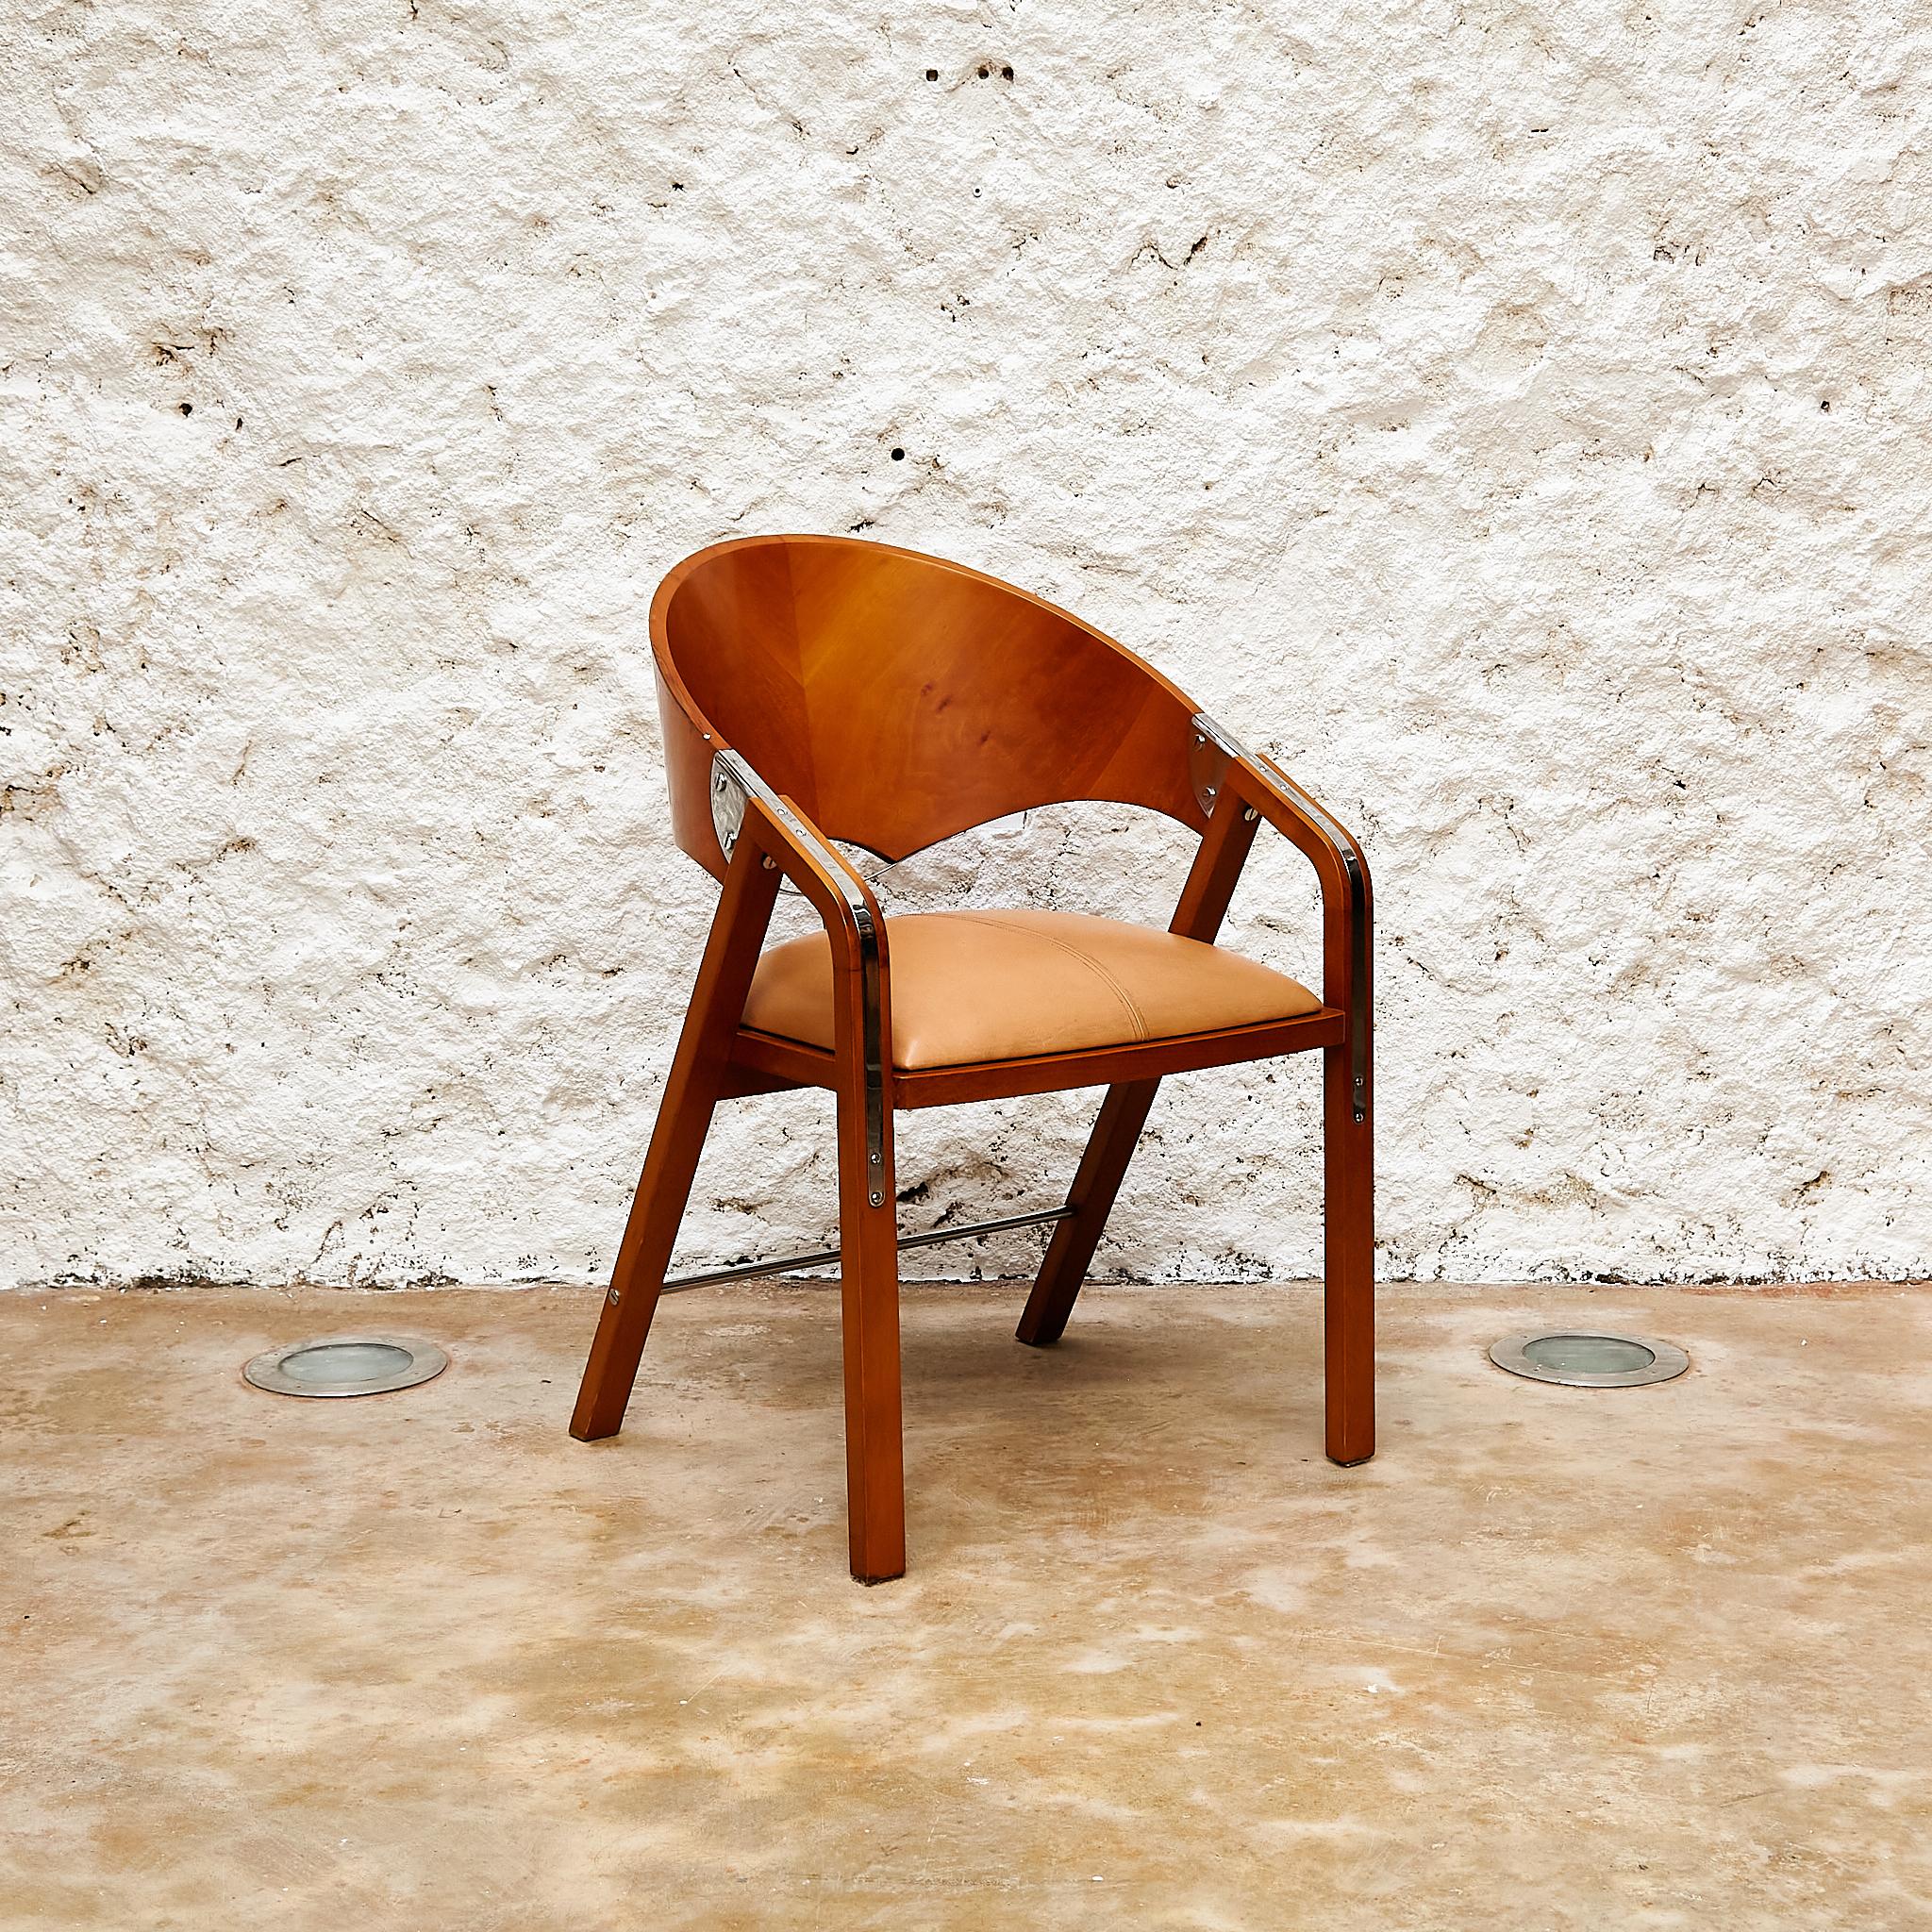 The Vintage 'Spinnaker' Chairs by Jamie Tresserra - Wood, Metal and Leather For Sale 3